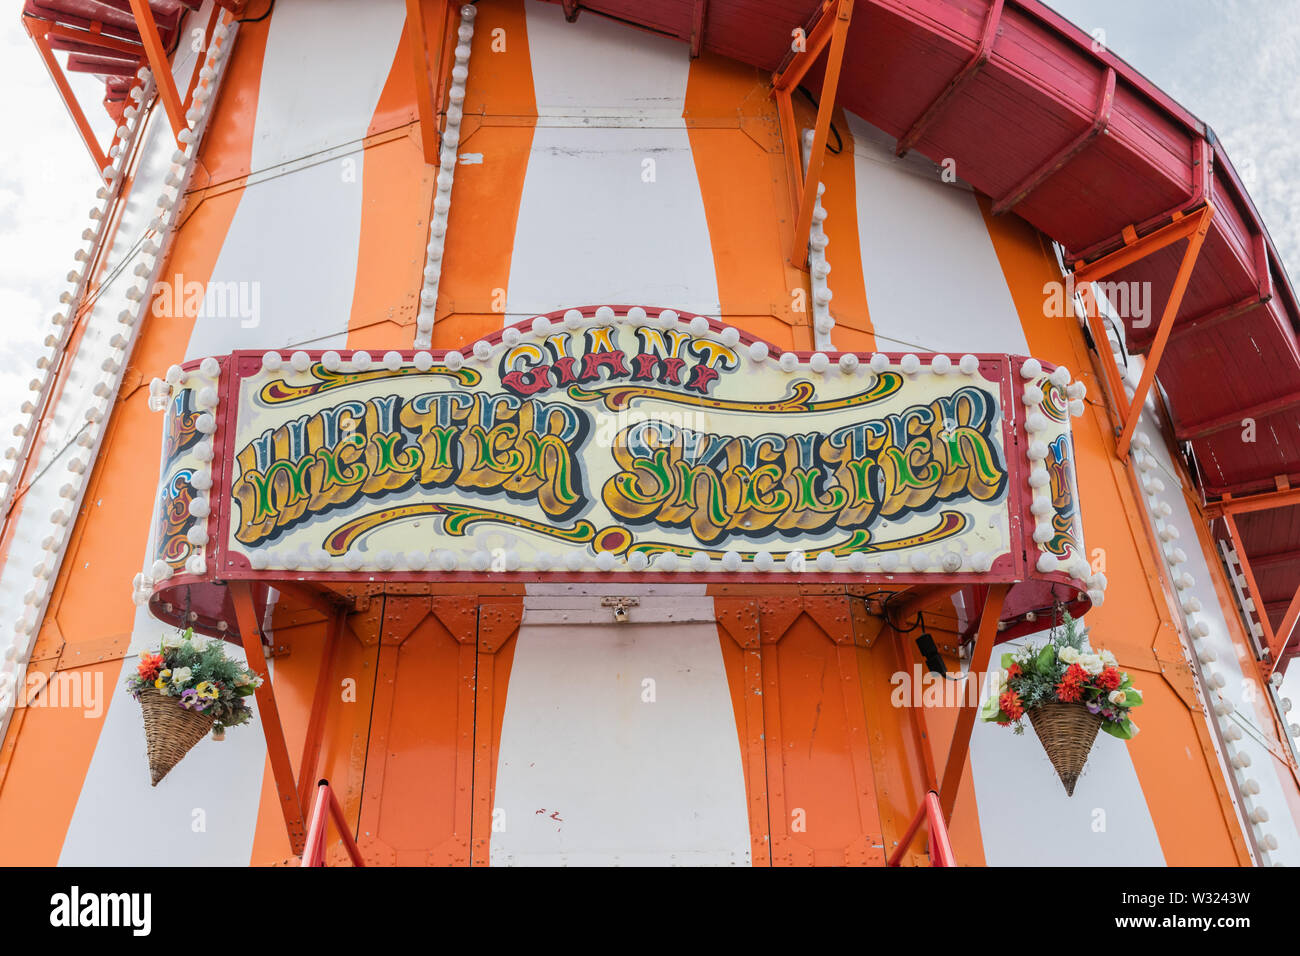 A sign on a vintage wooden helter skelter at a fair Stock Photo